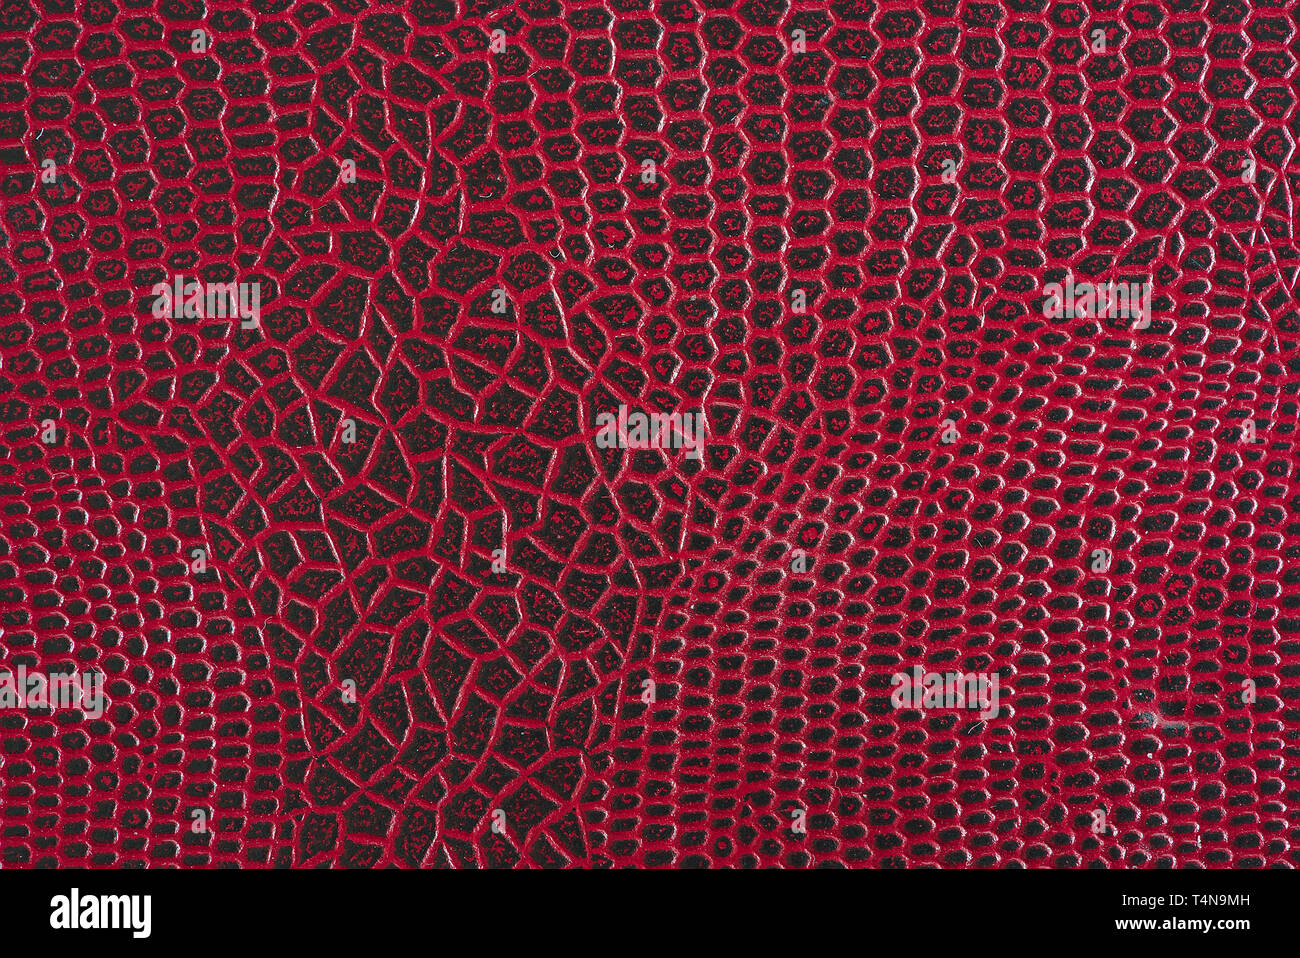 texture, red leather background. Crocodile skin effect Stock Photo